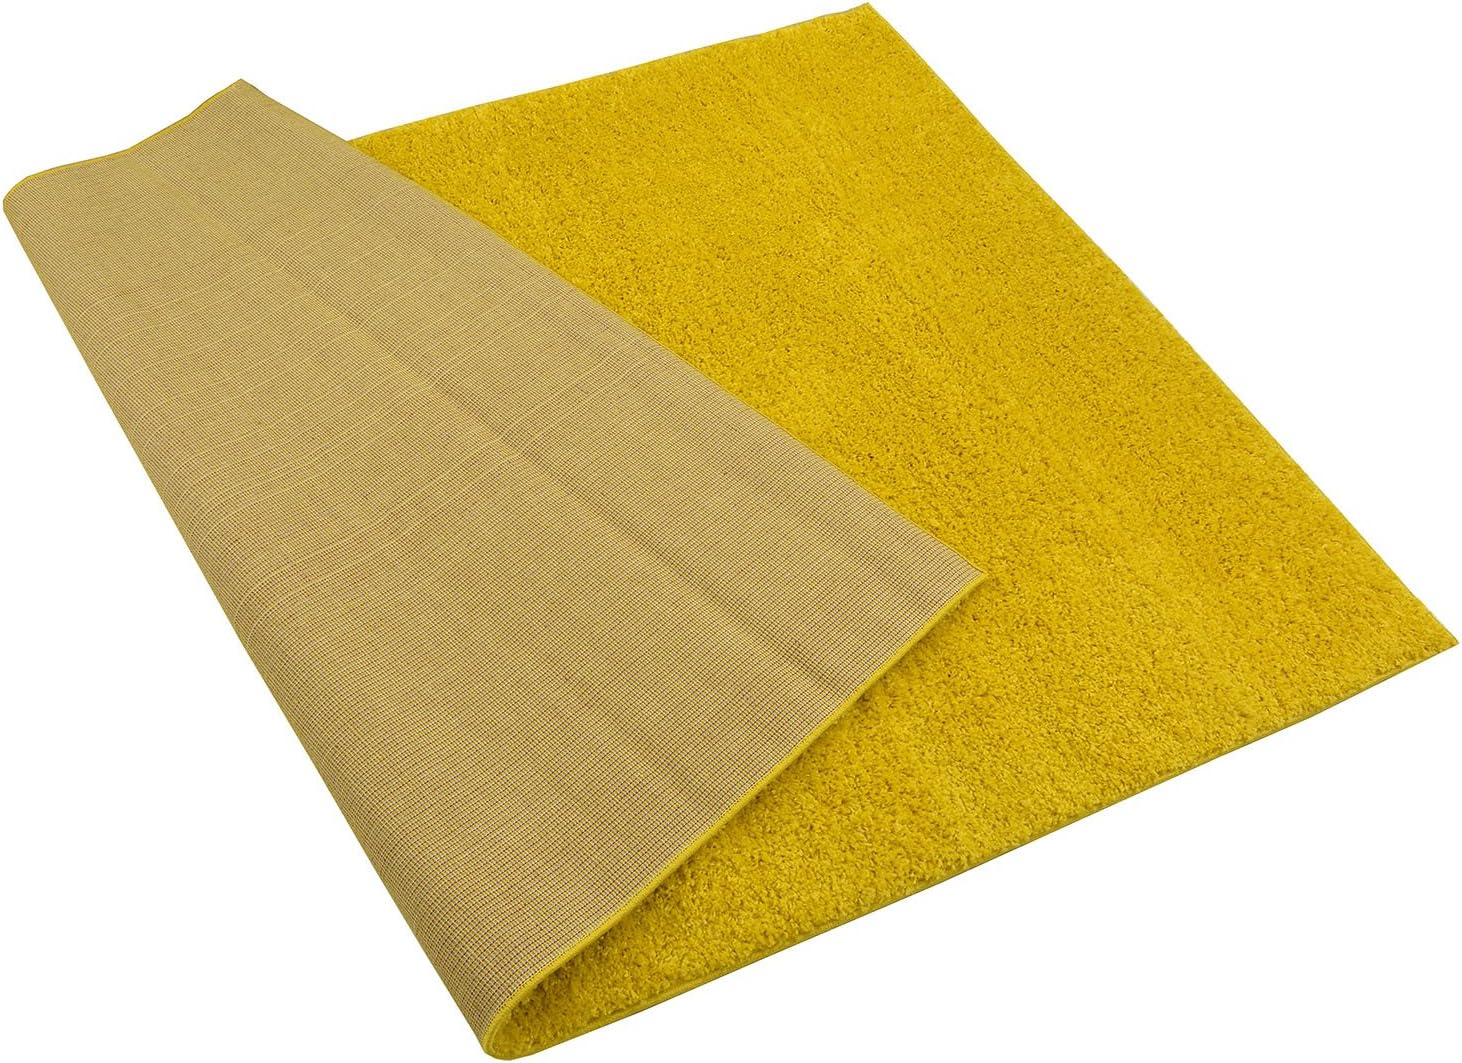 SOHO Shaggy Collection Solid Color Shag Area Rug (Yellow, 5 x 7)